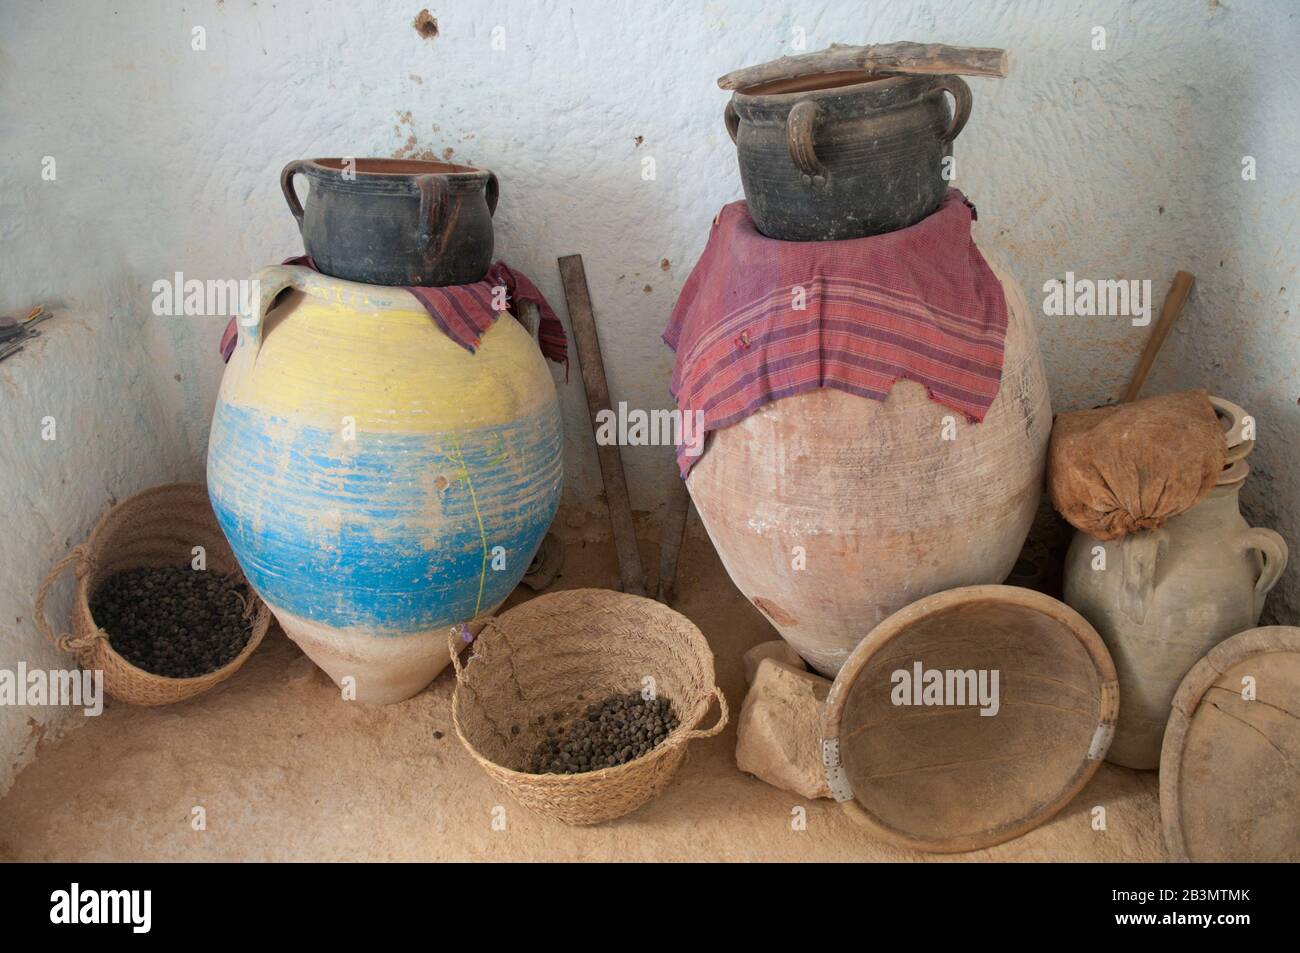 Such domestic implements are traditional for underground living  - Tunisia, North Africa. There are wood plate, fictile craft jars, maunds on the phot Stock Photo